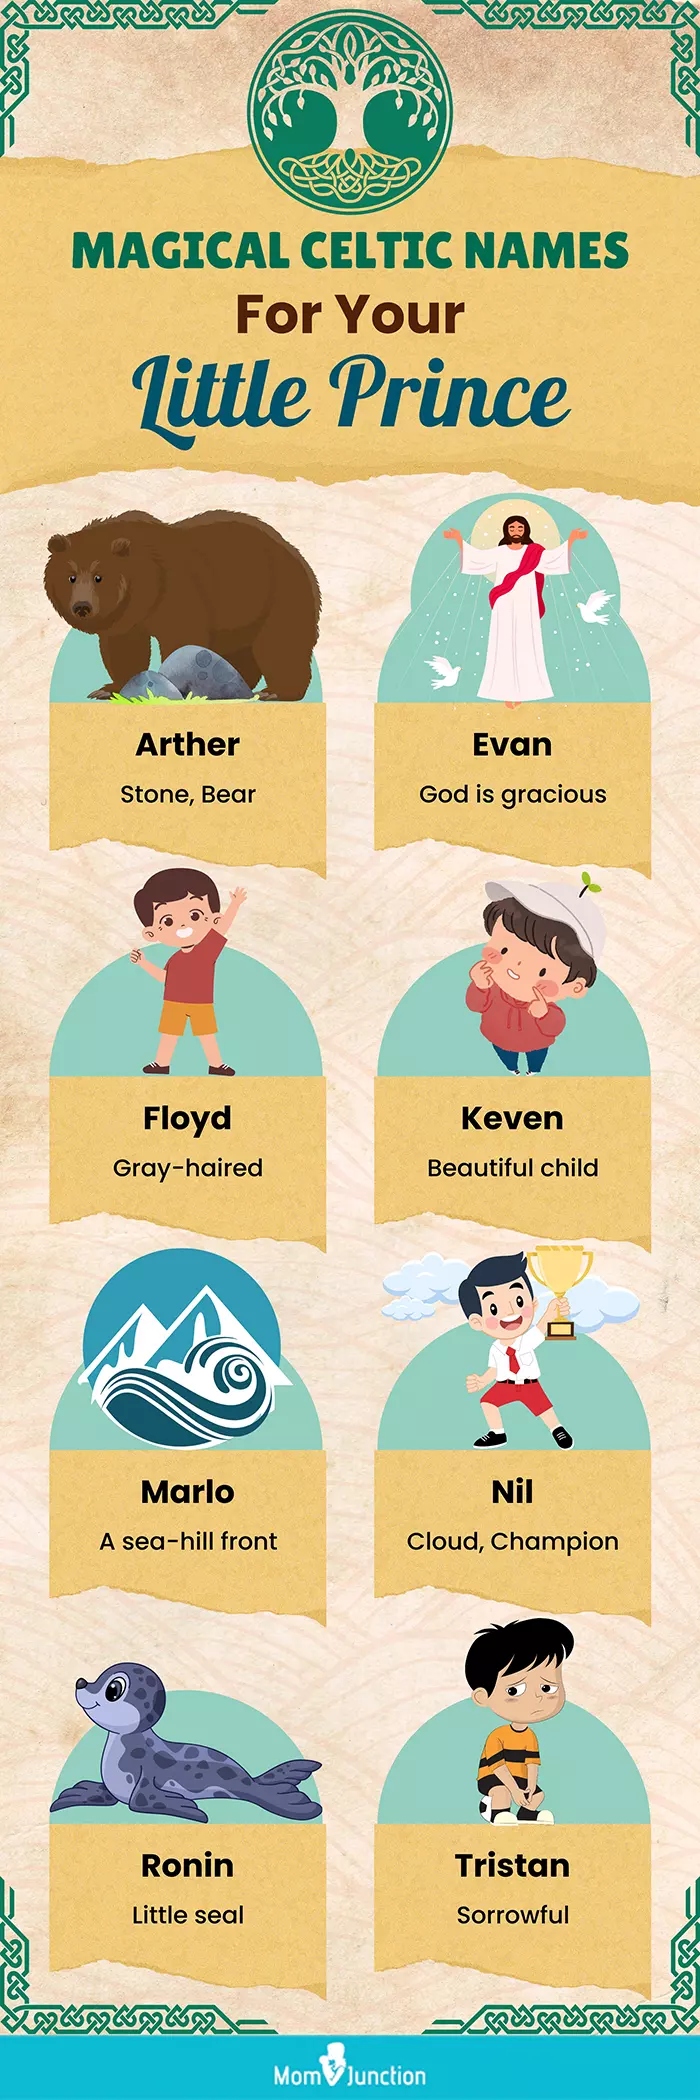 magical celtic names for your little prince (infographic)